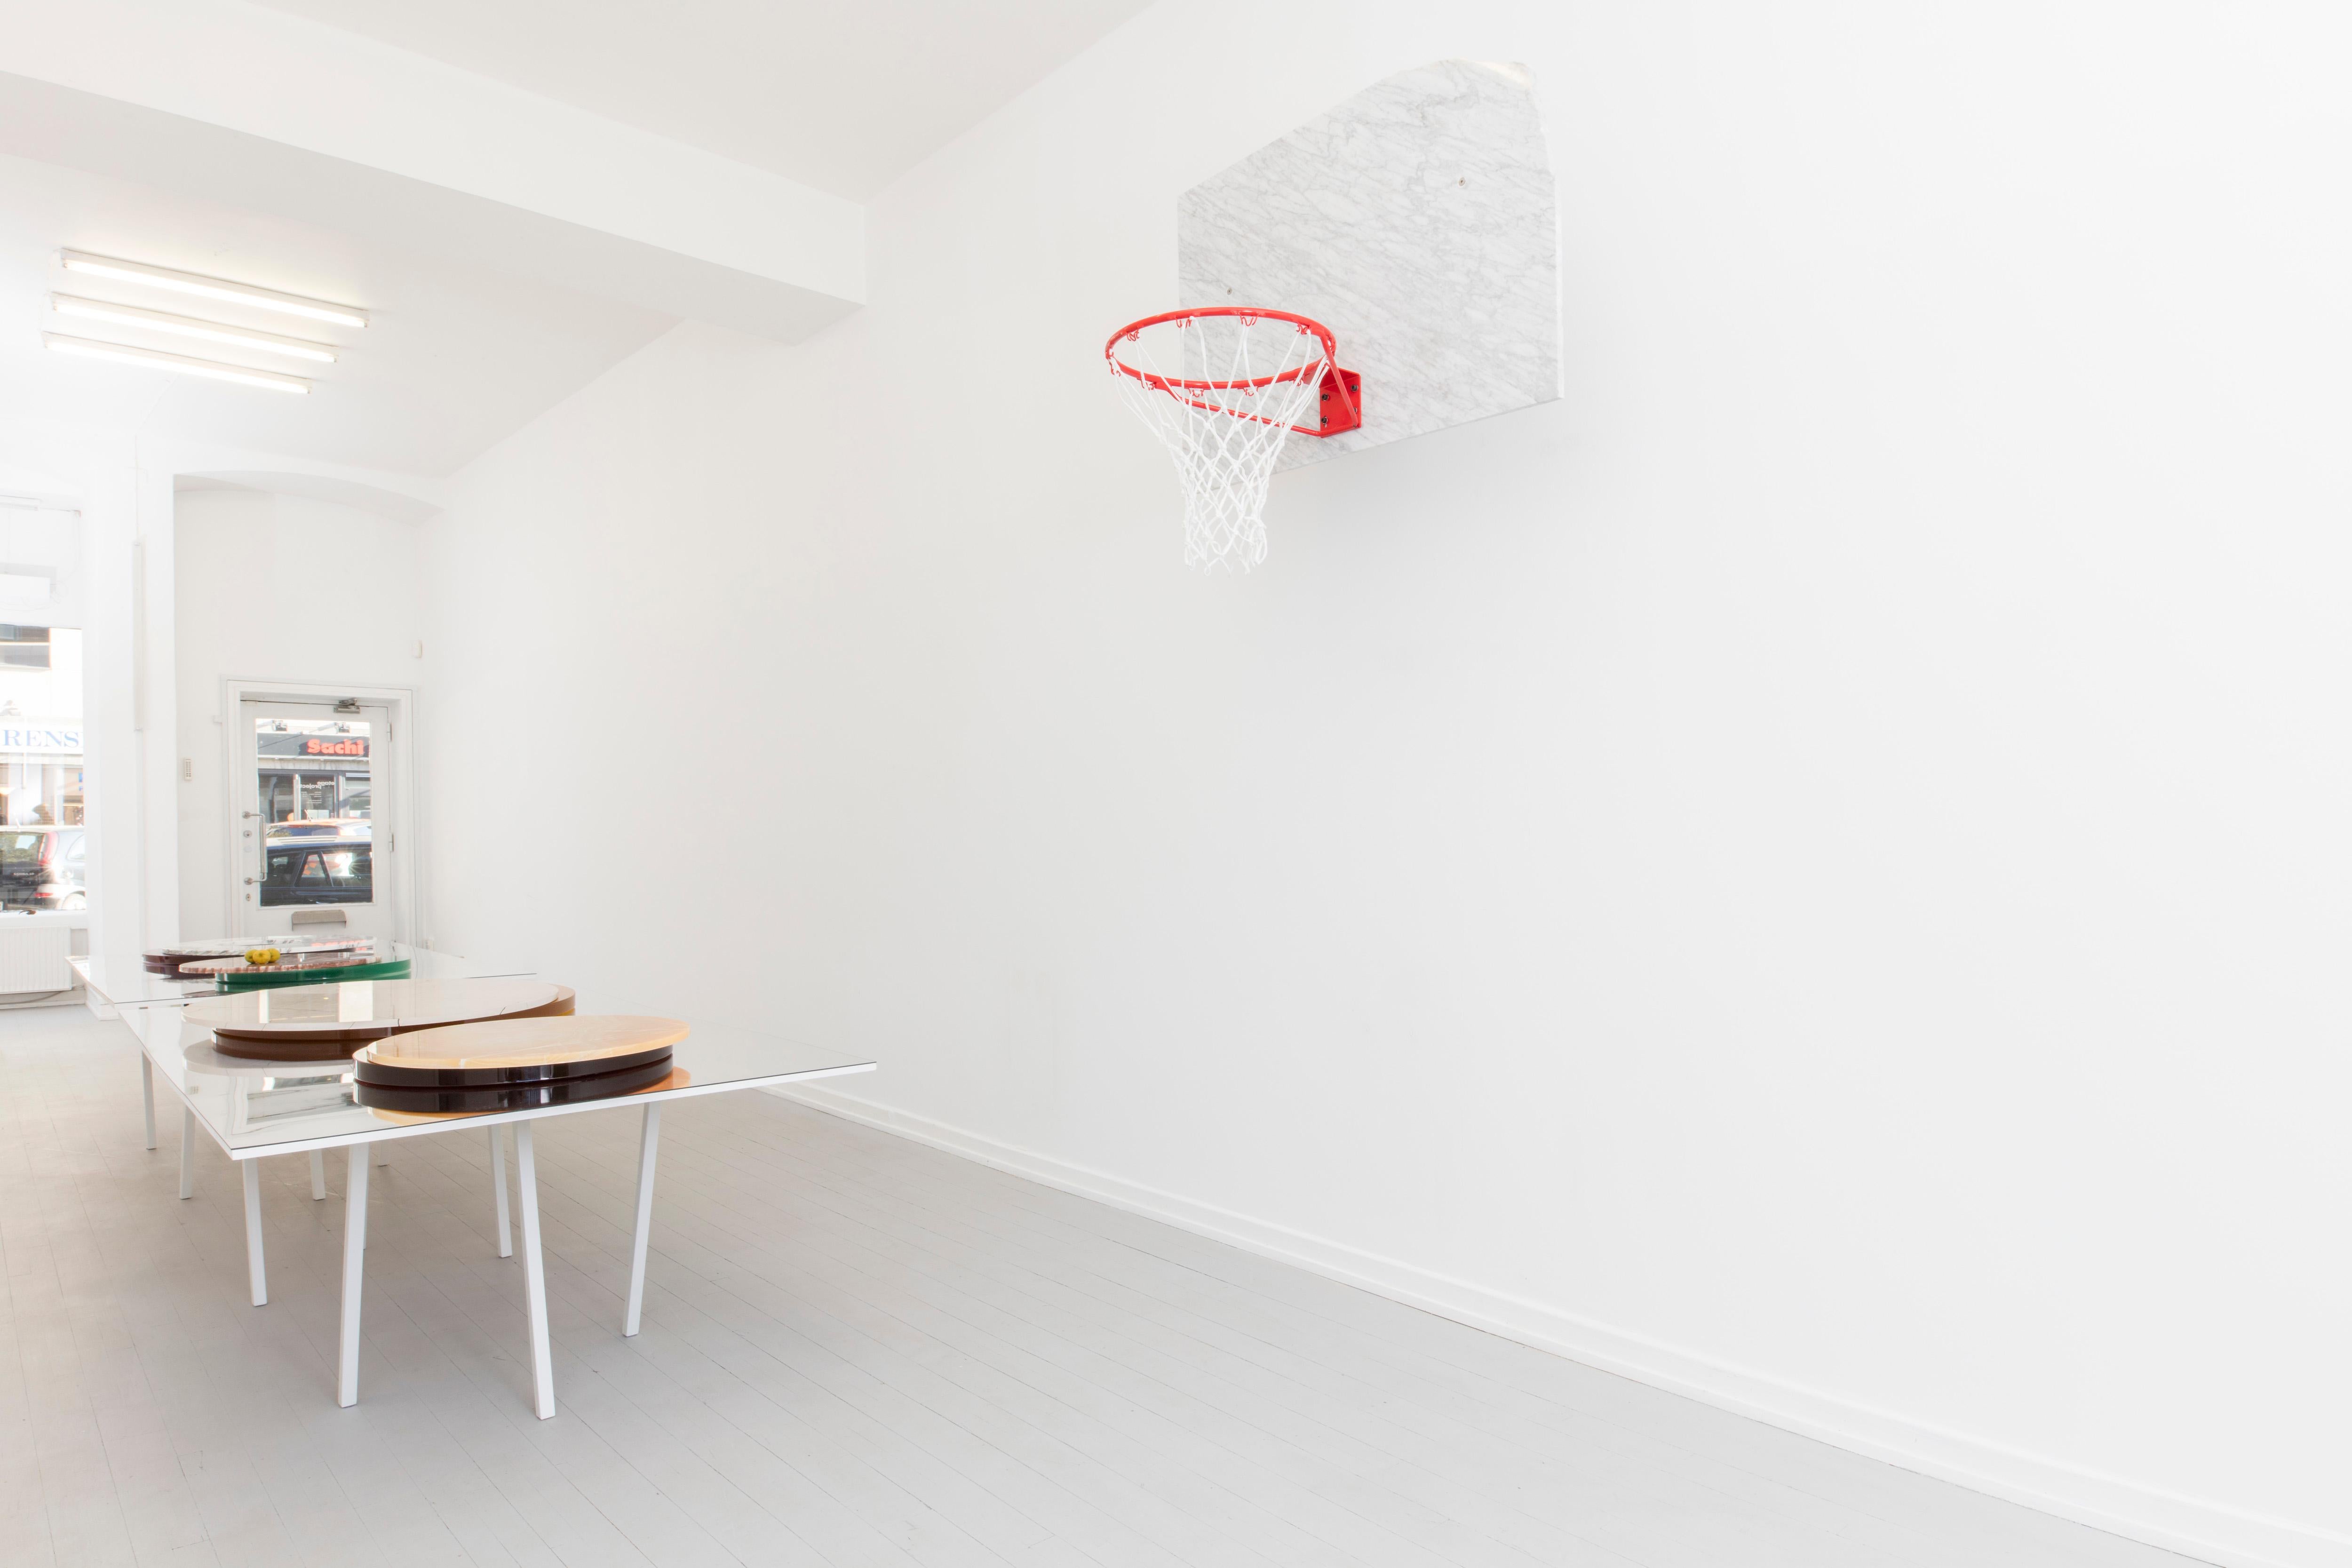 Post-Modern Basketball Pot and Backboard with Italian Marble, by Guillermo Santoma